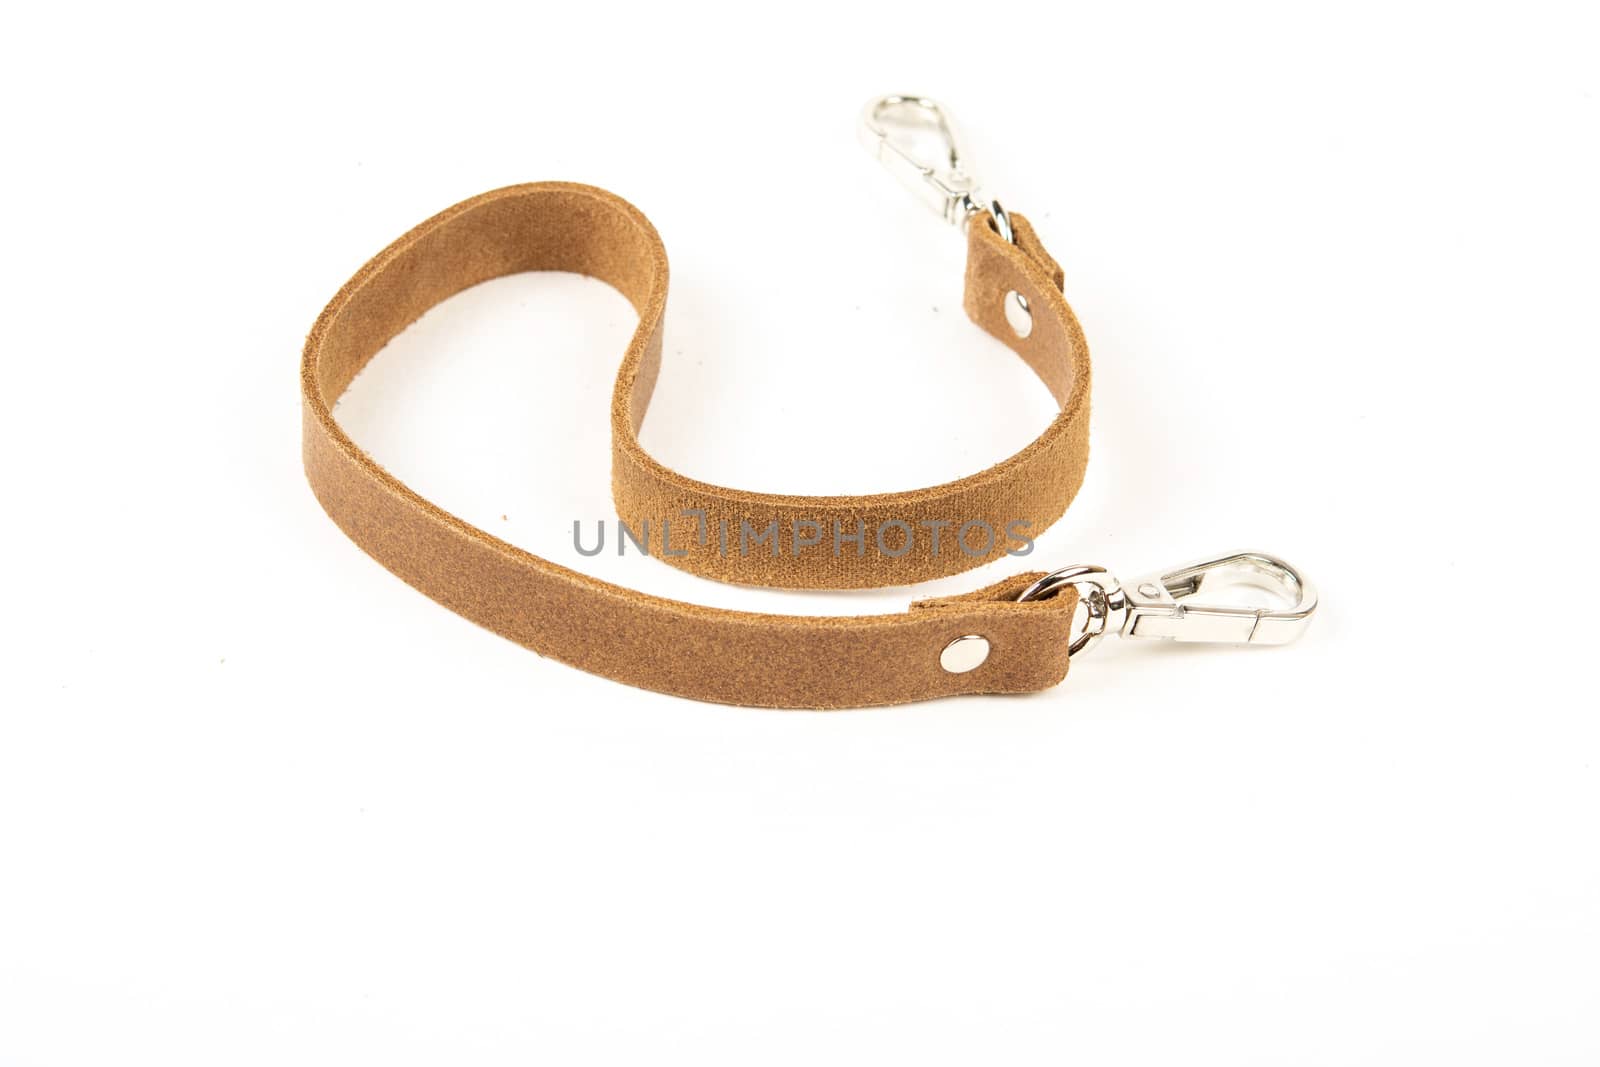 brown leather belt with carbine and metal accessories isolated on white background. use for bags and suitcases